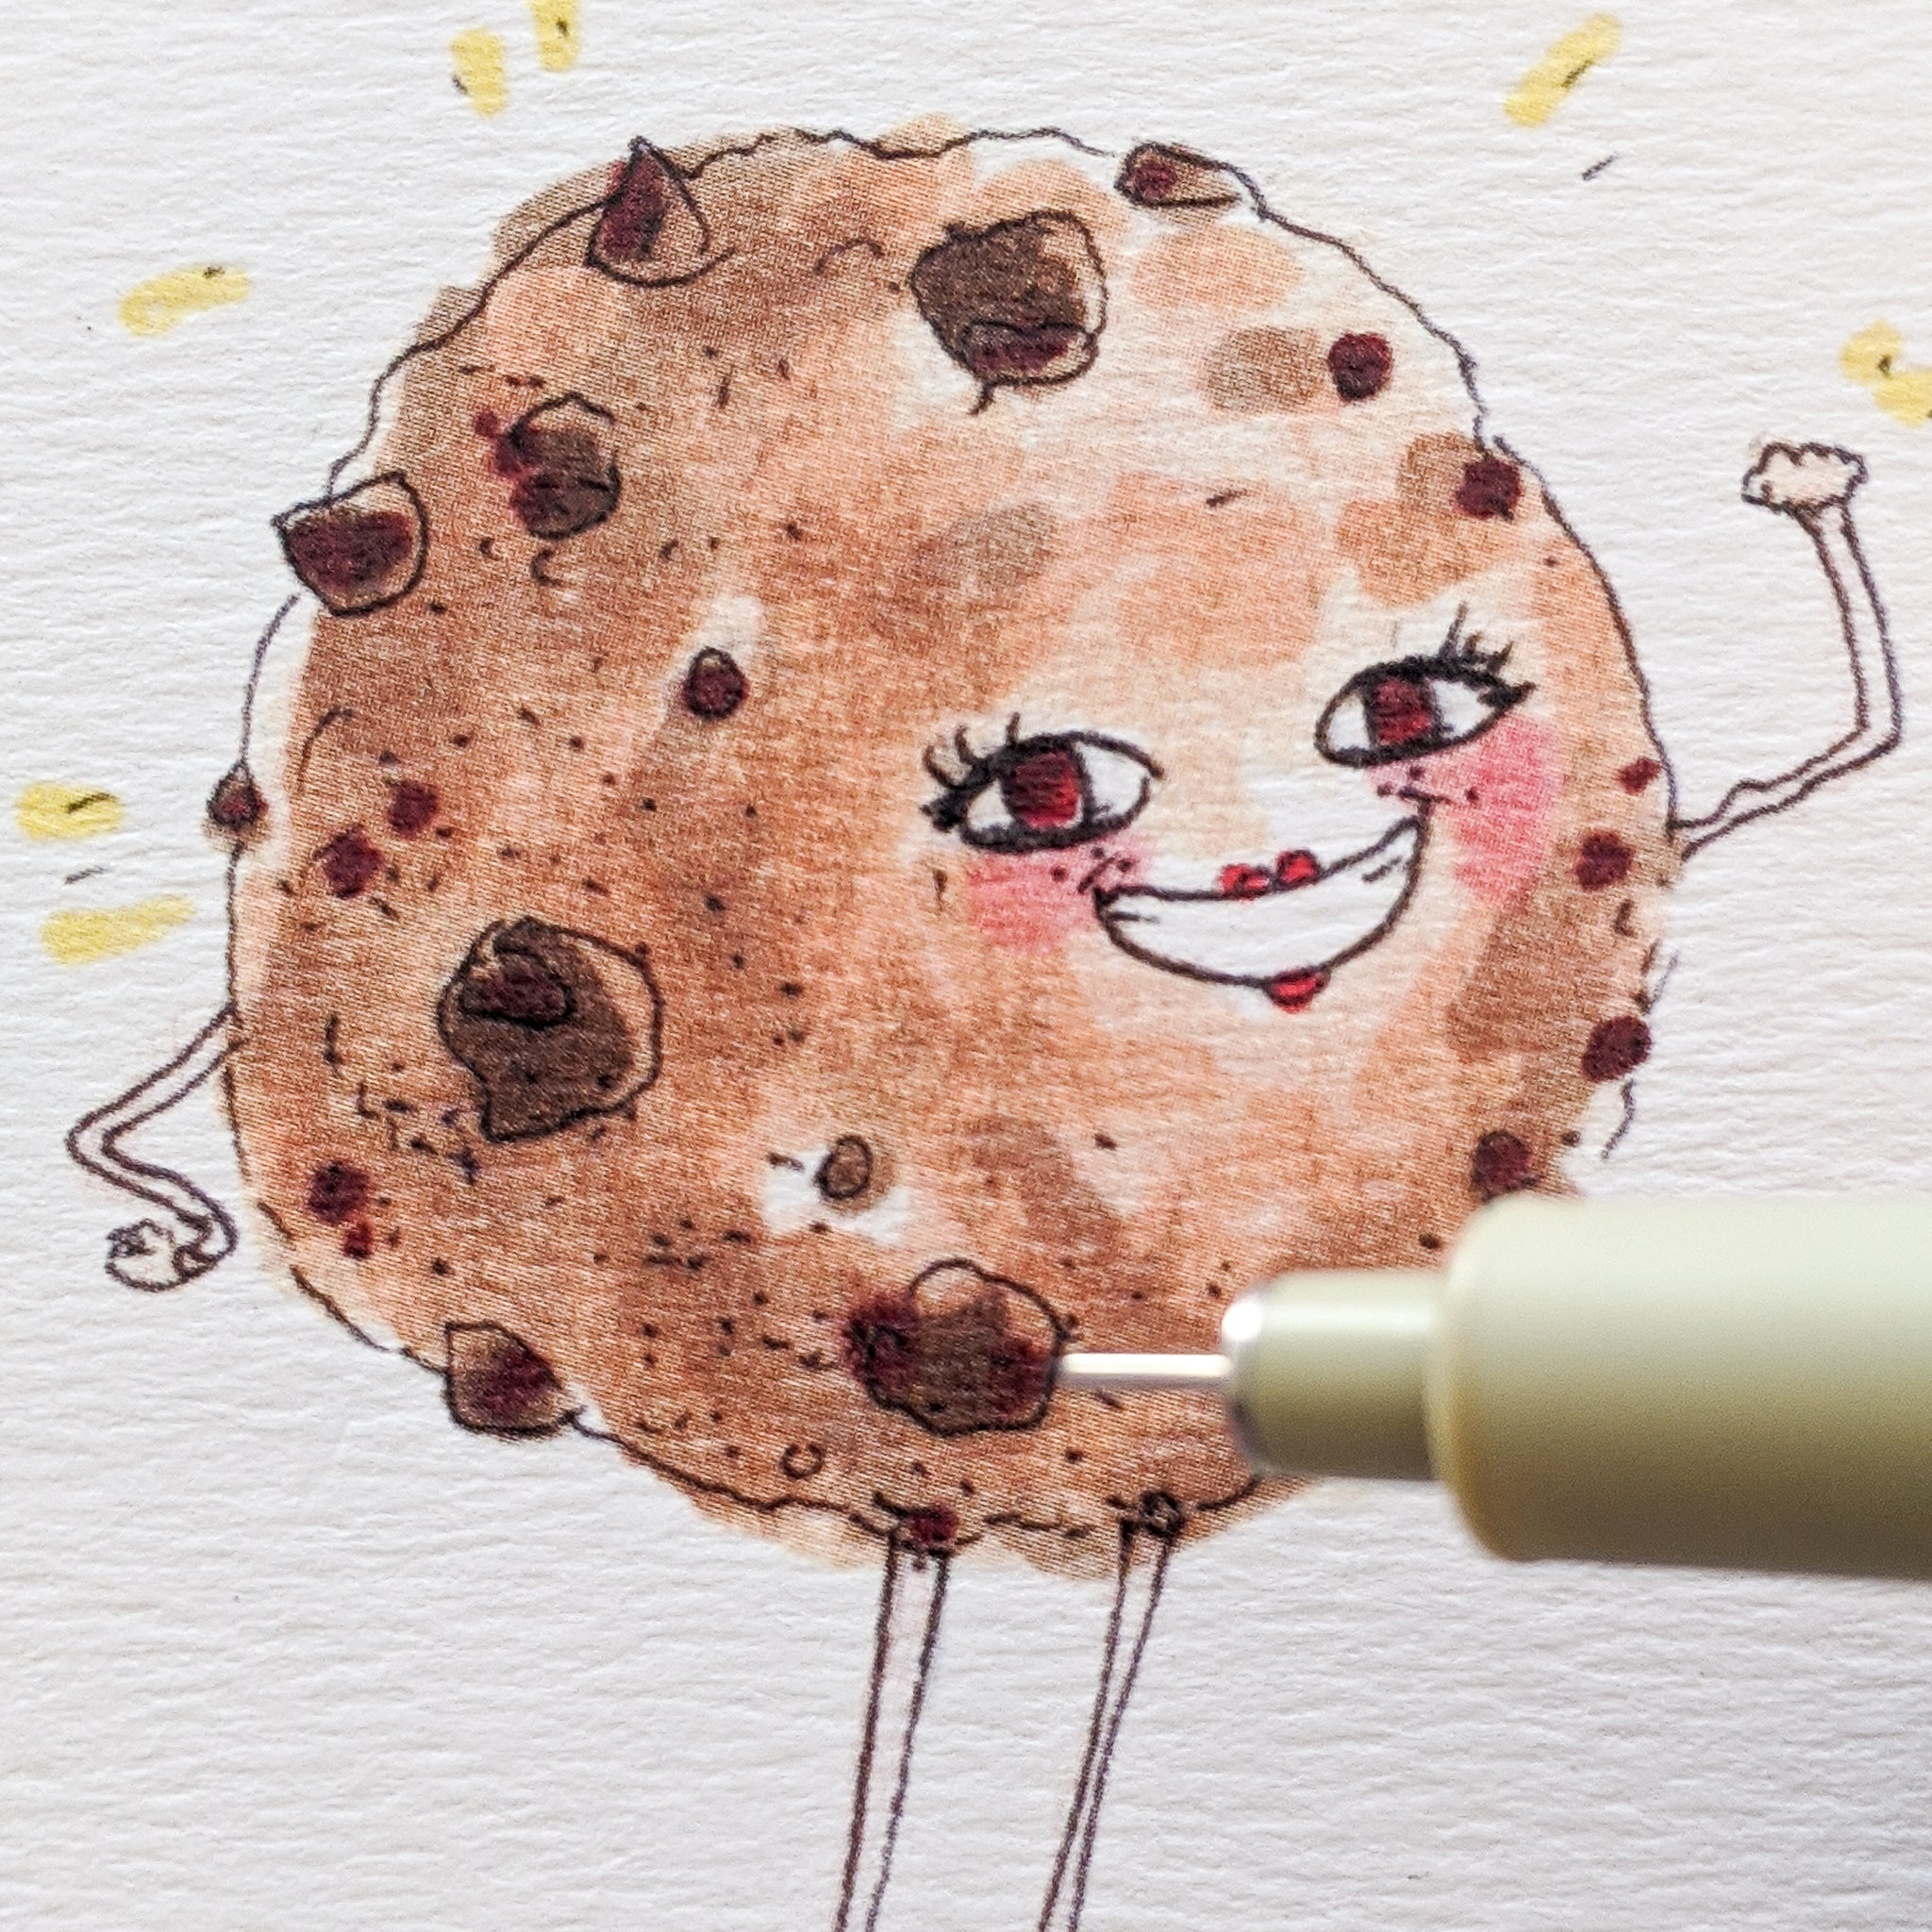 You Are One Tough Cookie - Well Drawn